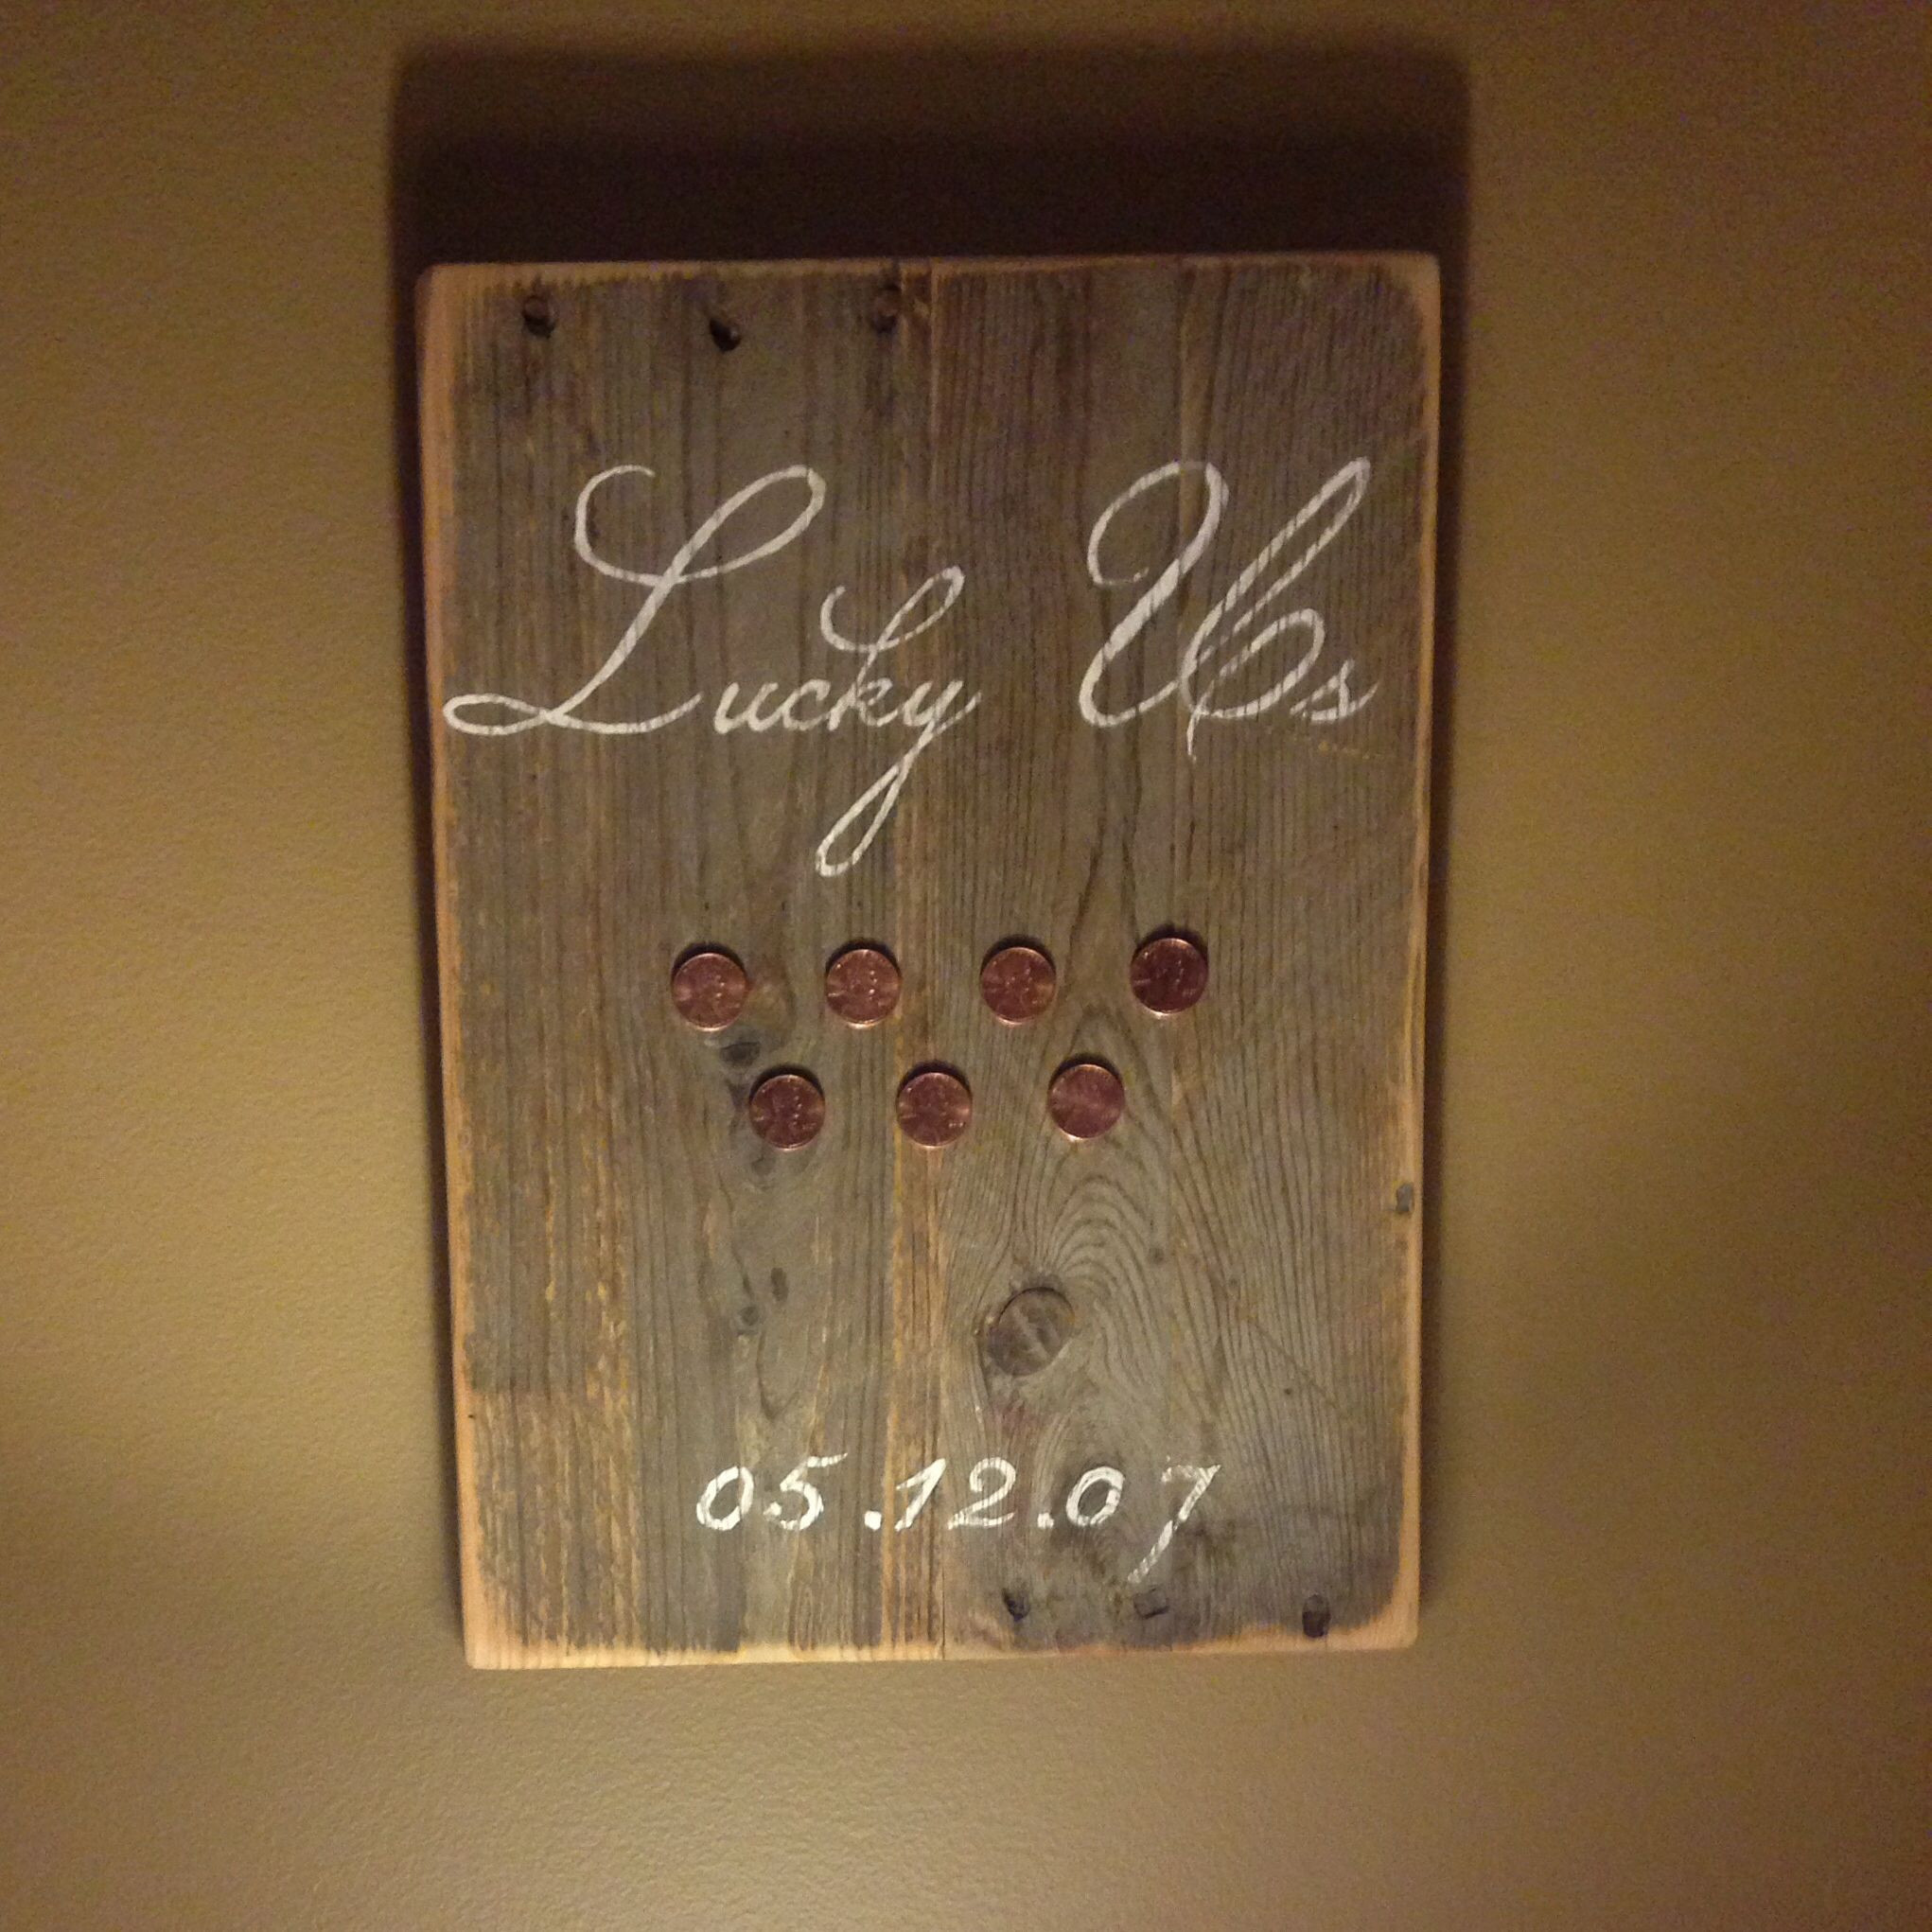 7 Year Anniversary Copper Gift Ideas
 Seven year copper anniversary t to my wife Pallet wood